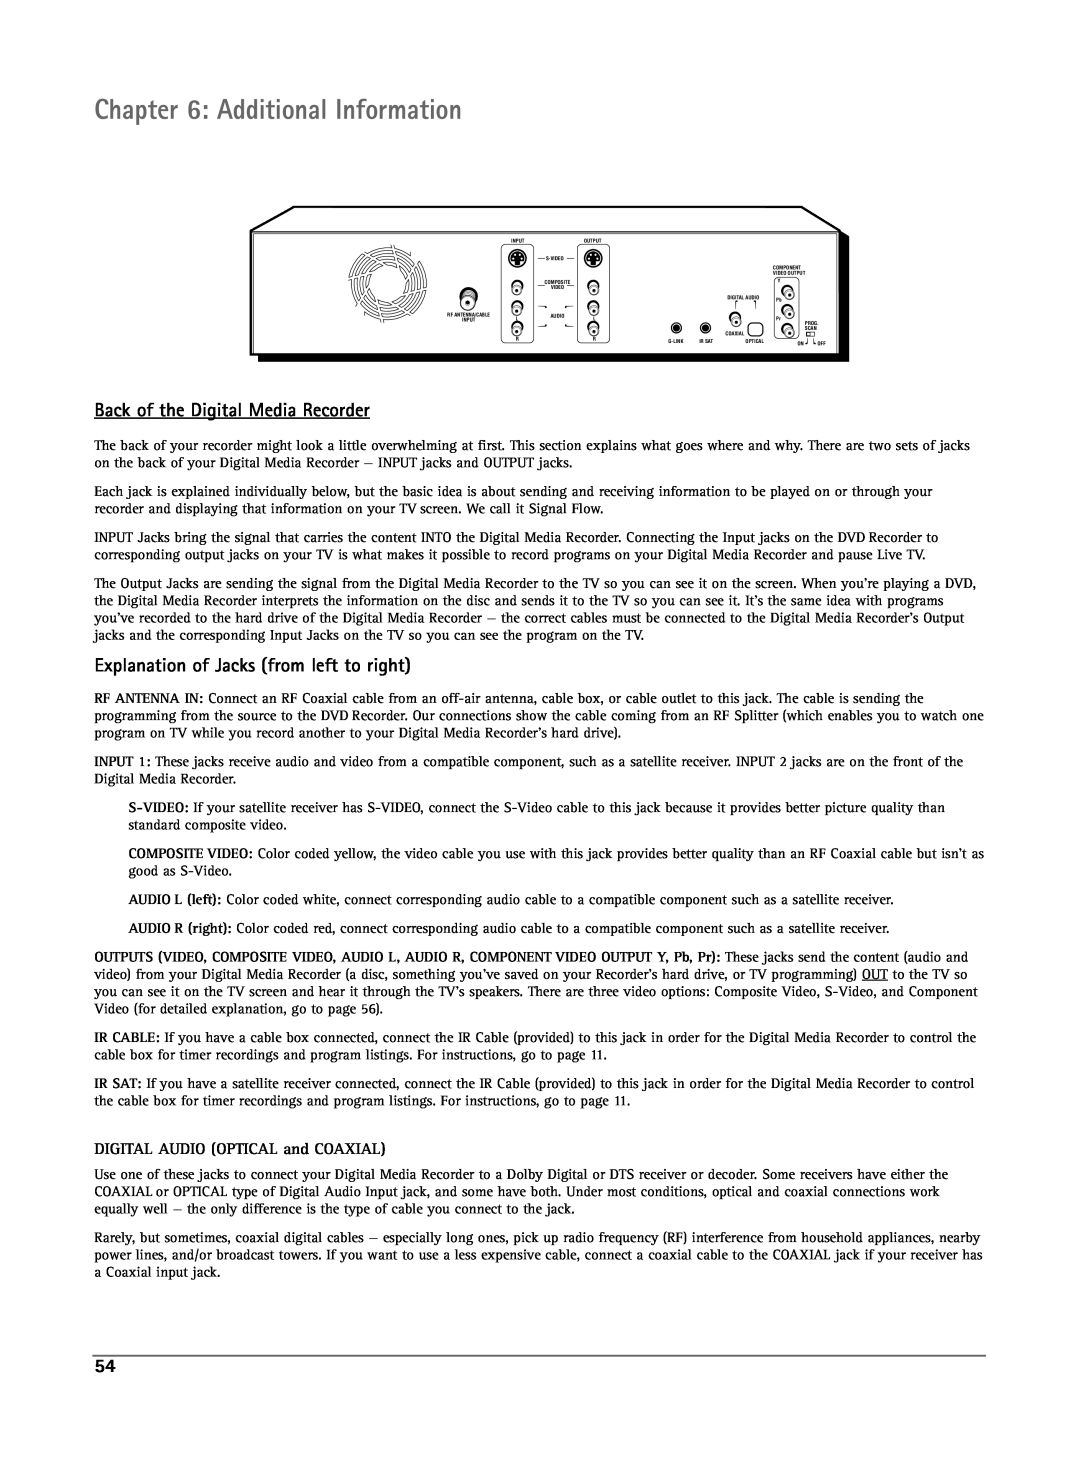 RCA DRS7000N manual Additional Information, Back of the Digital Media Recorder, Explanation of Jacks from left to right 